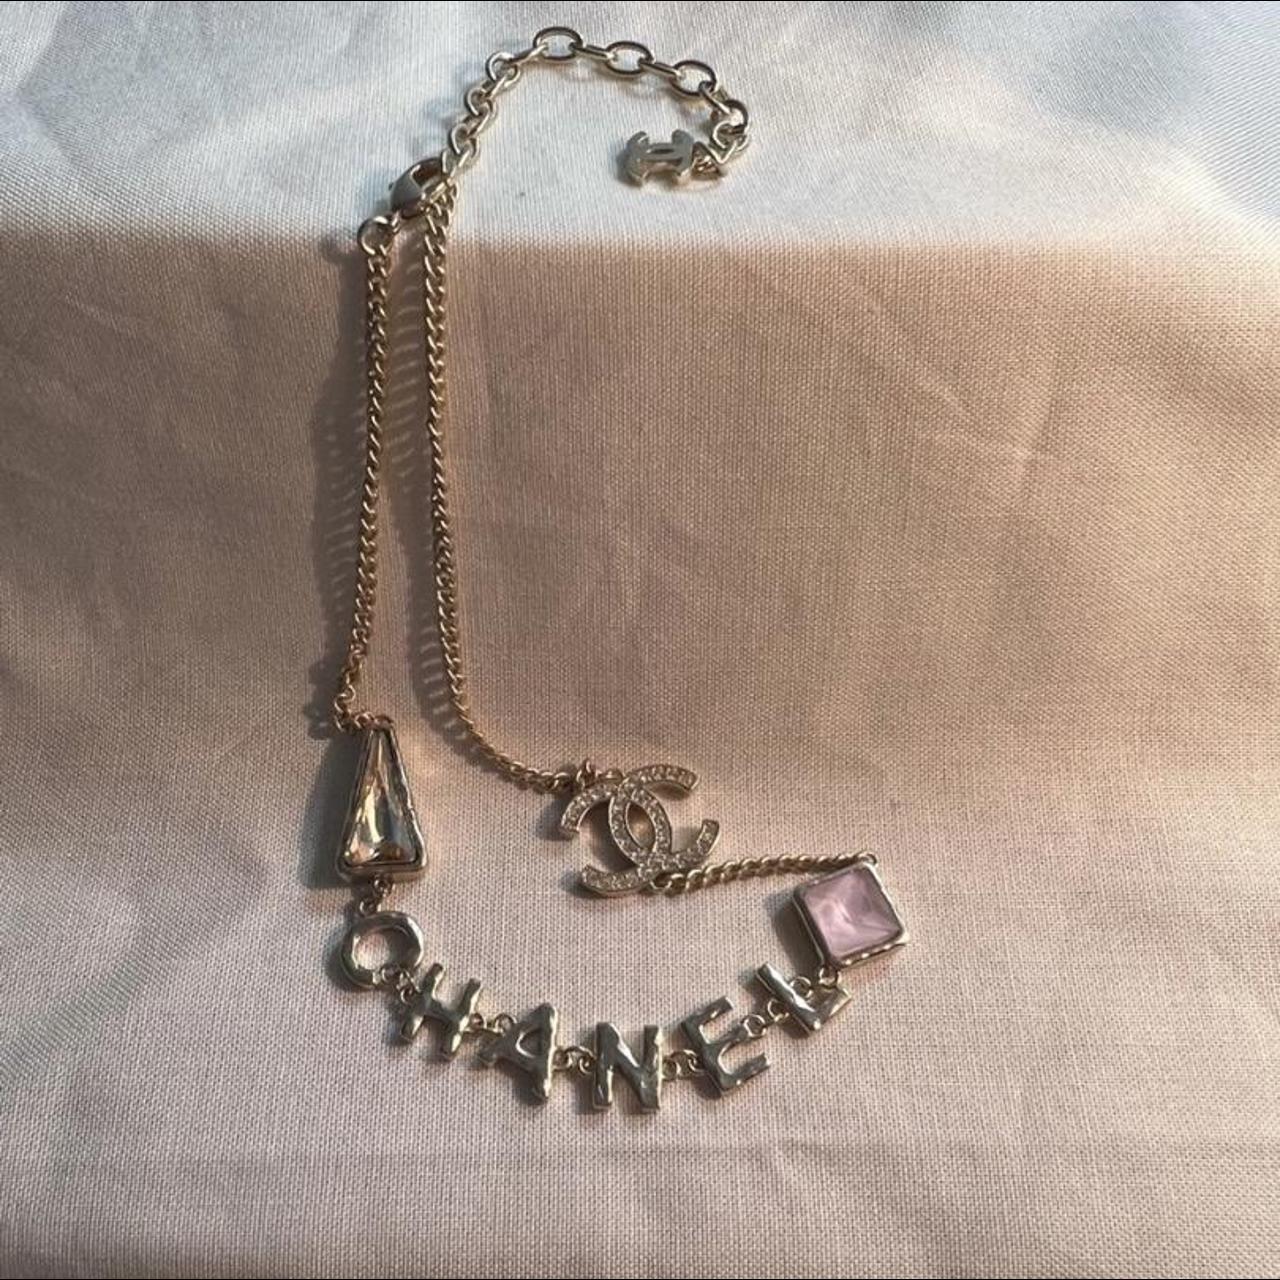 Chanel chocker, 100% authentic. Made in France. - Depop